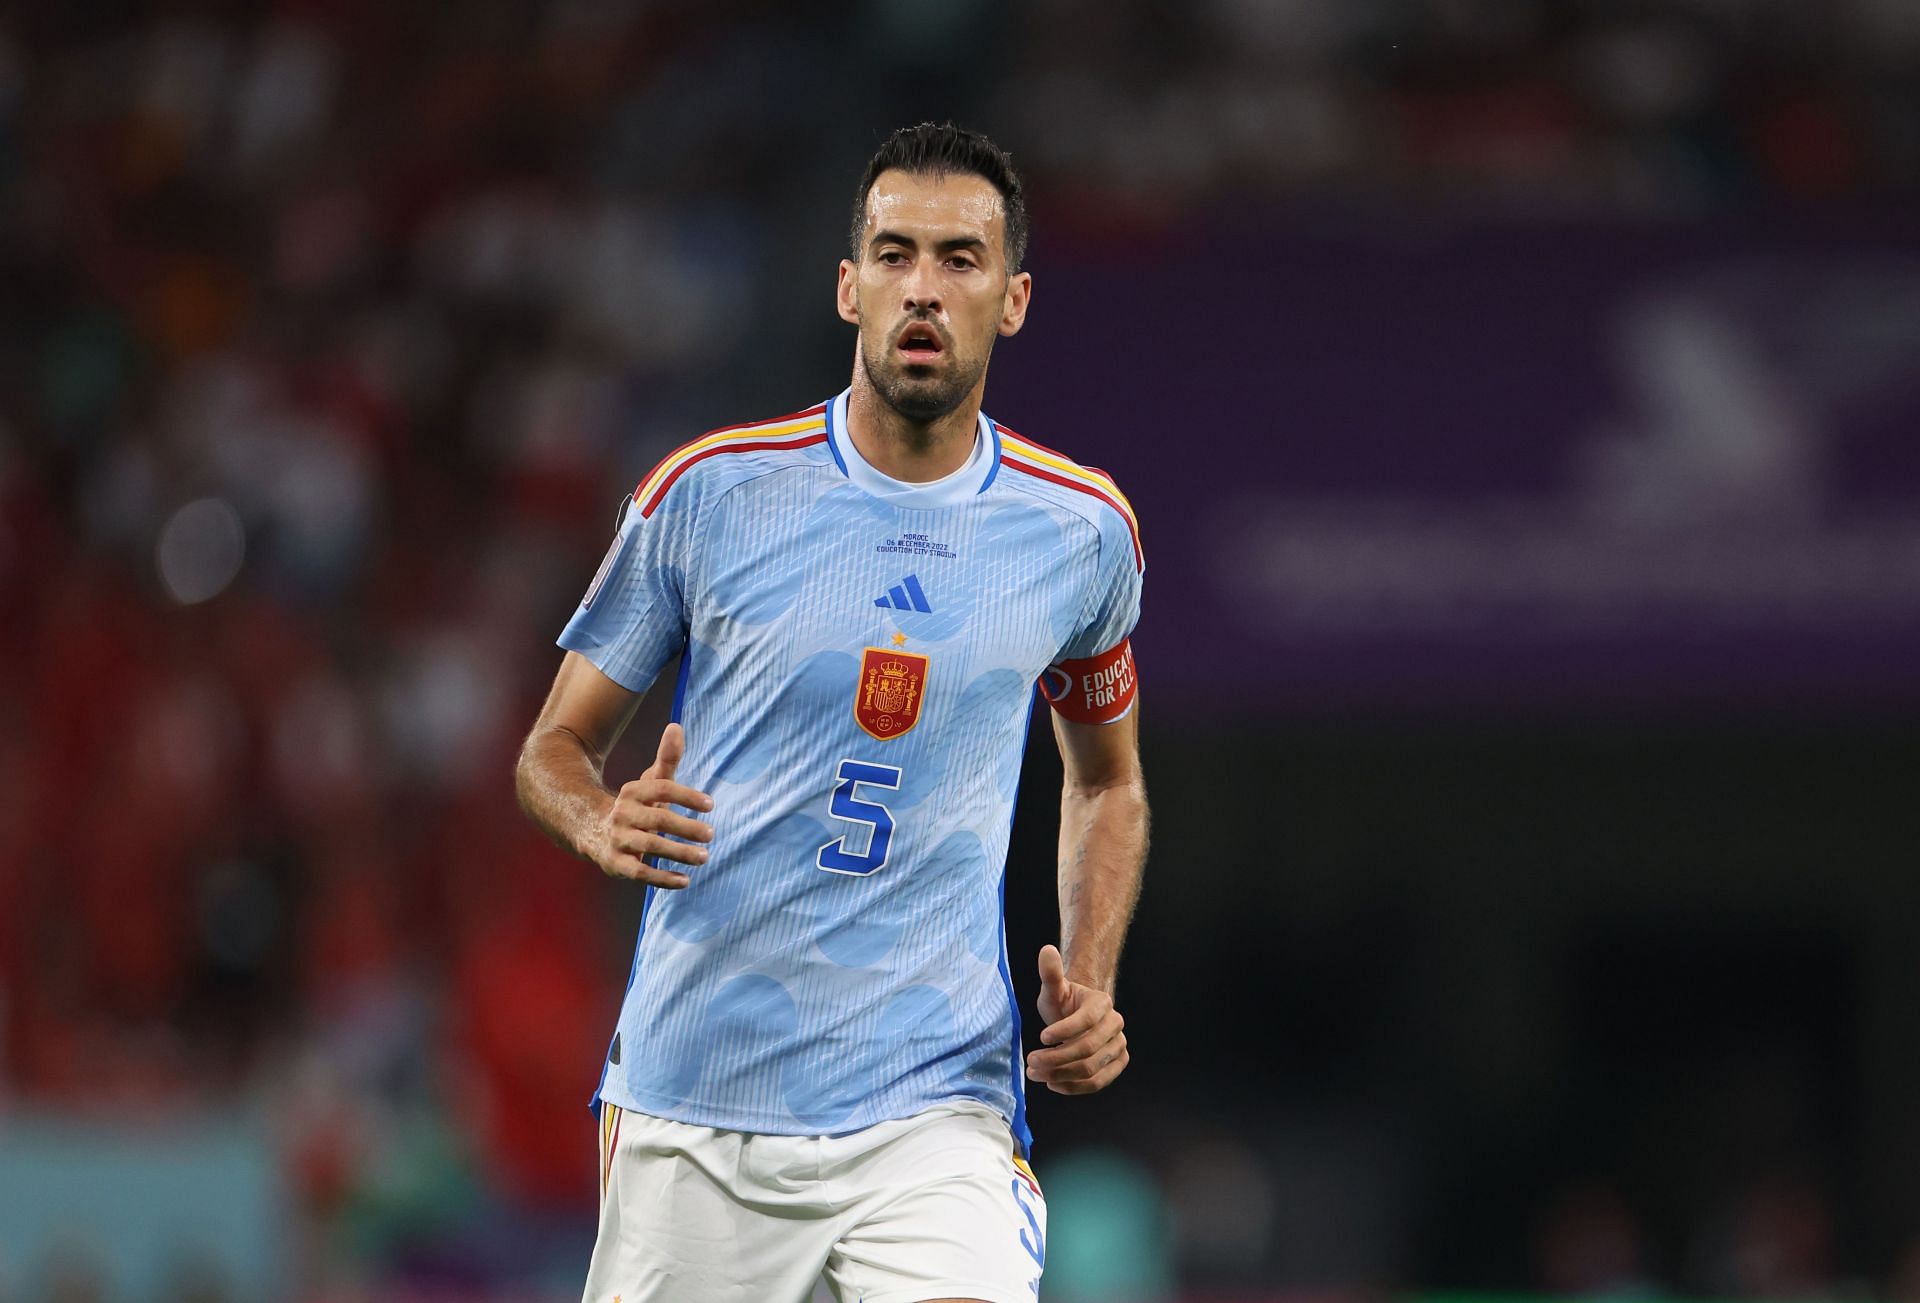 Sergio Busquets had an agreement to stay until 2025 but the deal was blocked.